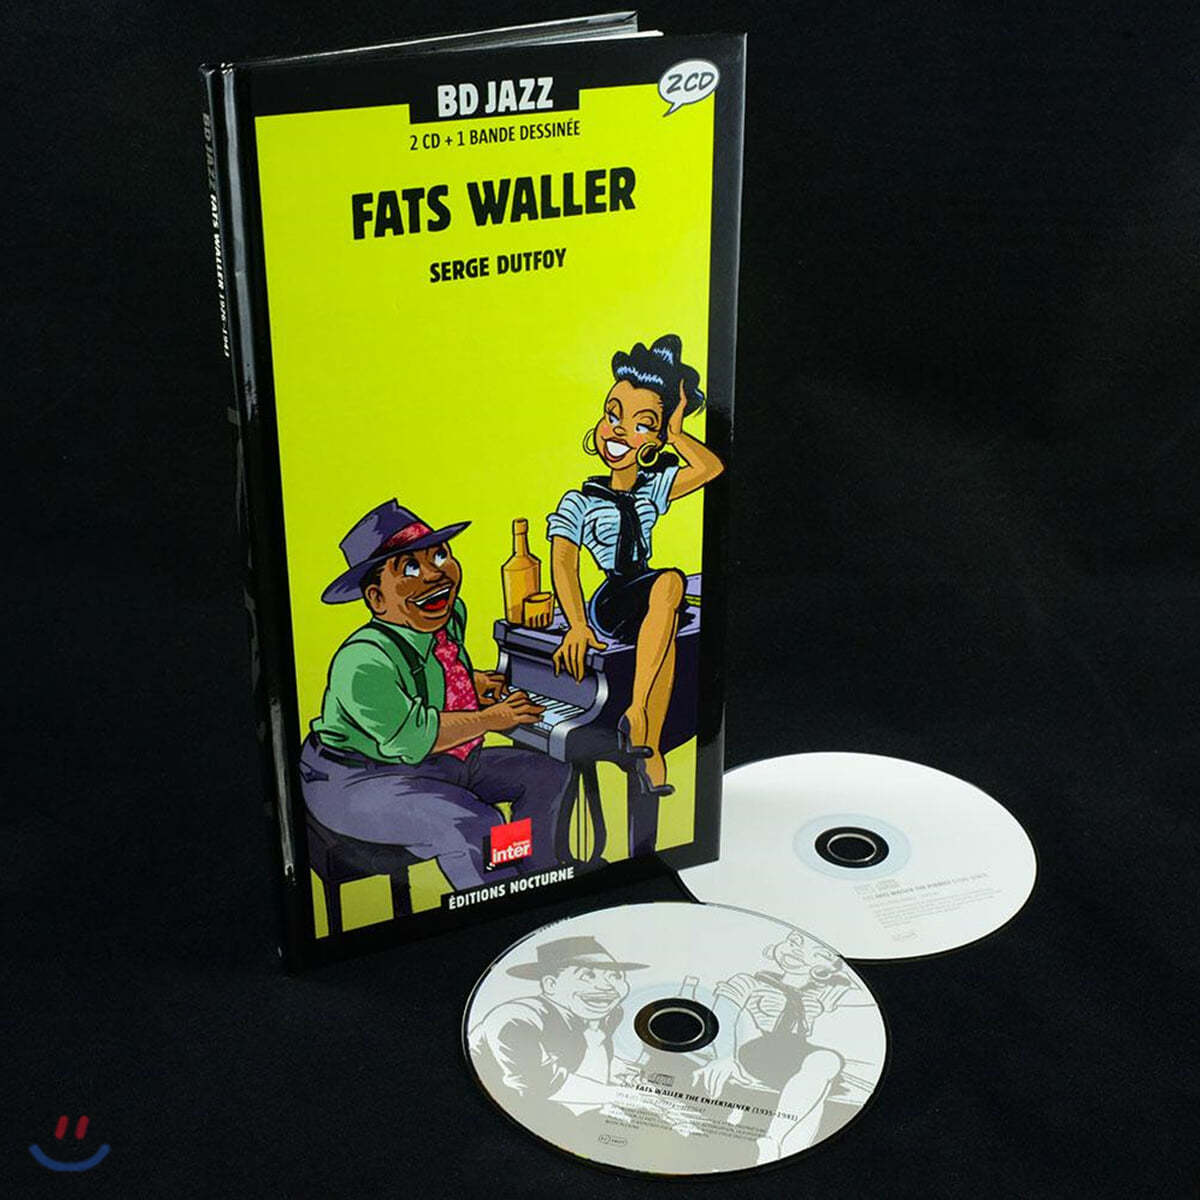 Fats Waller (Illustrated by Serge Dutfoy)